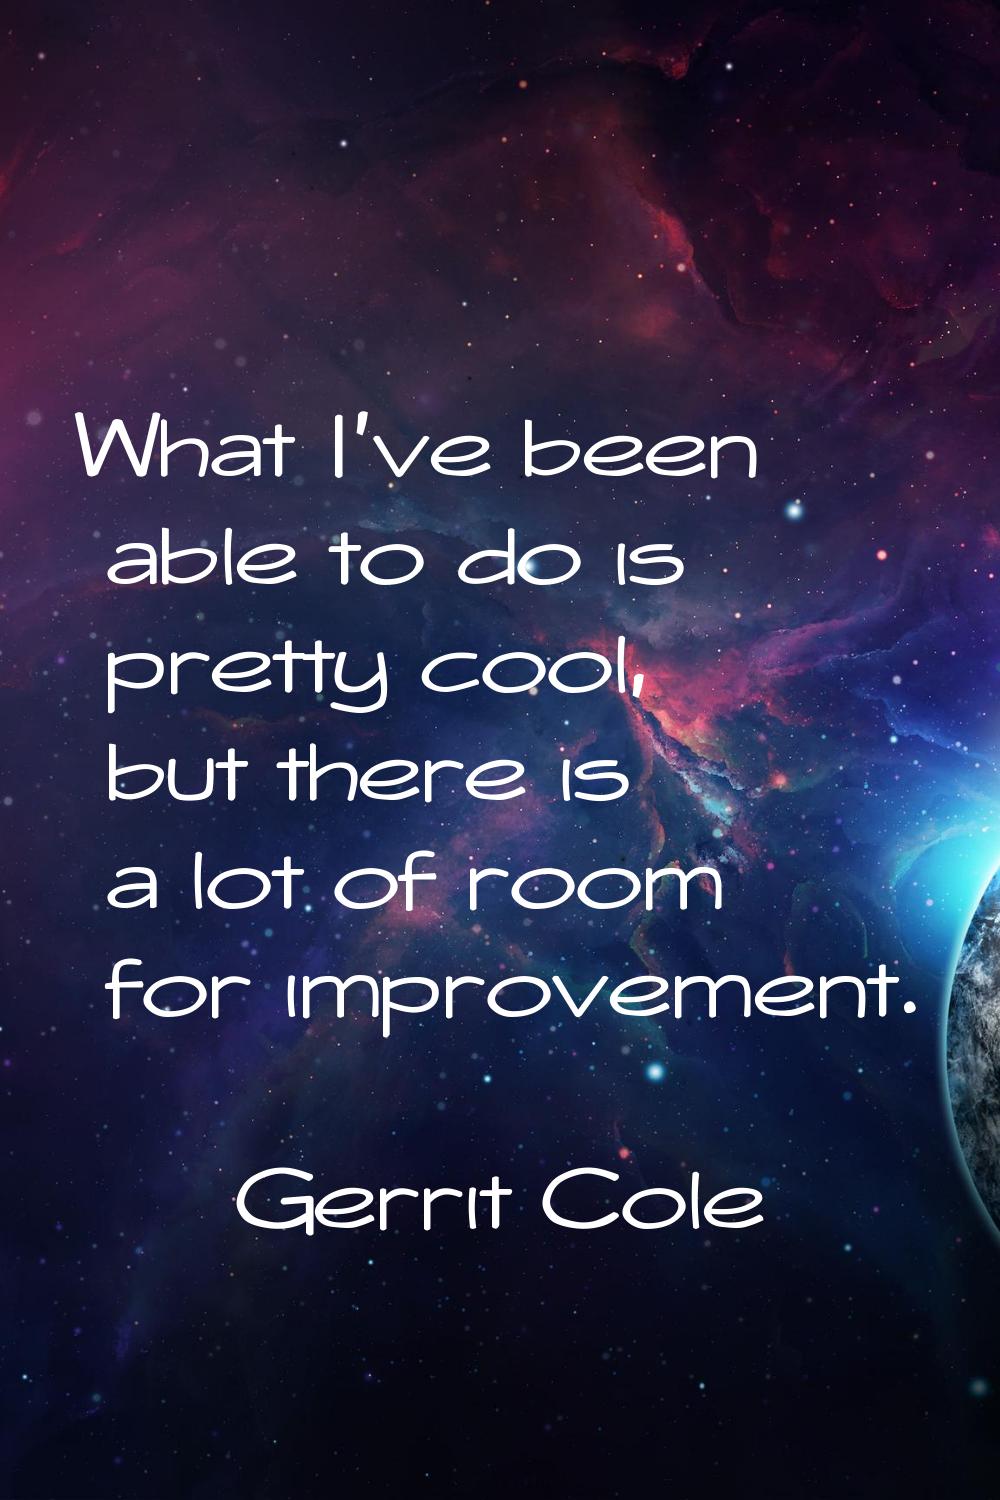 What I've been able to do is pretty cool, but there is a lot of room for improvement.